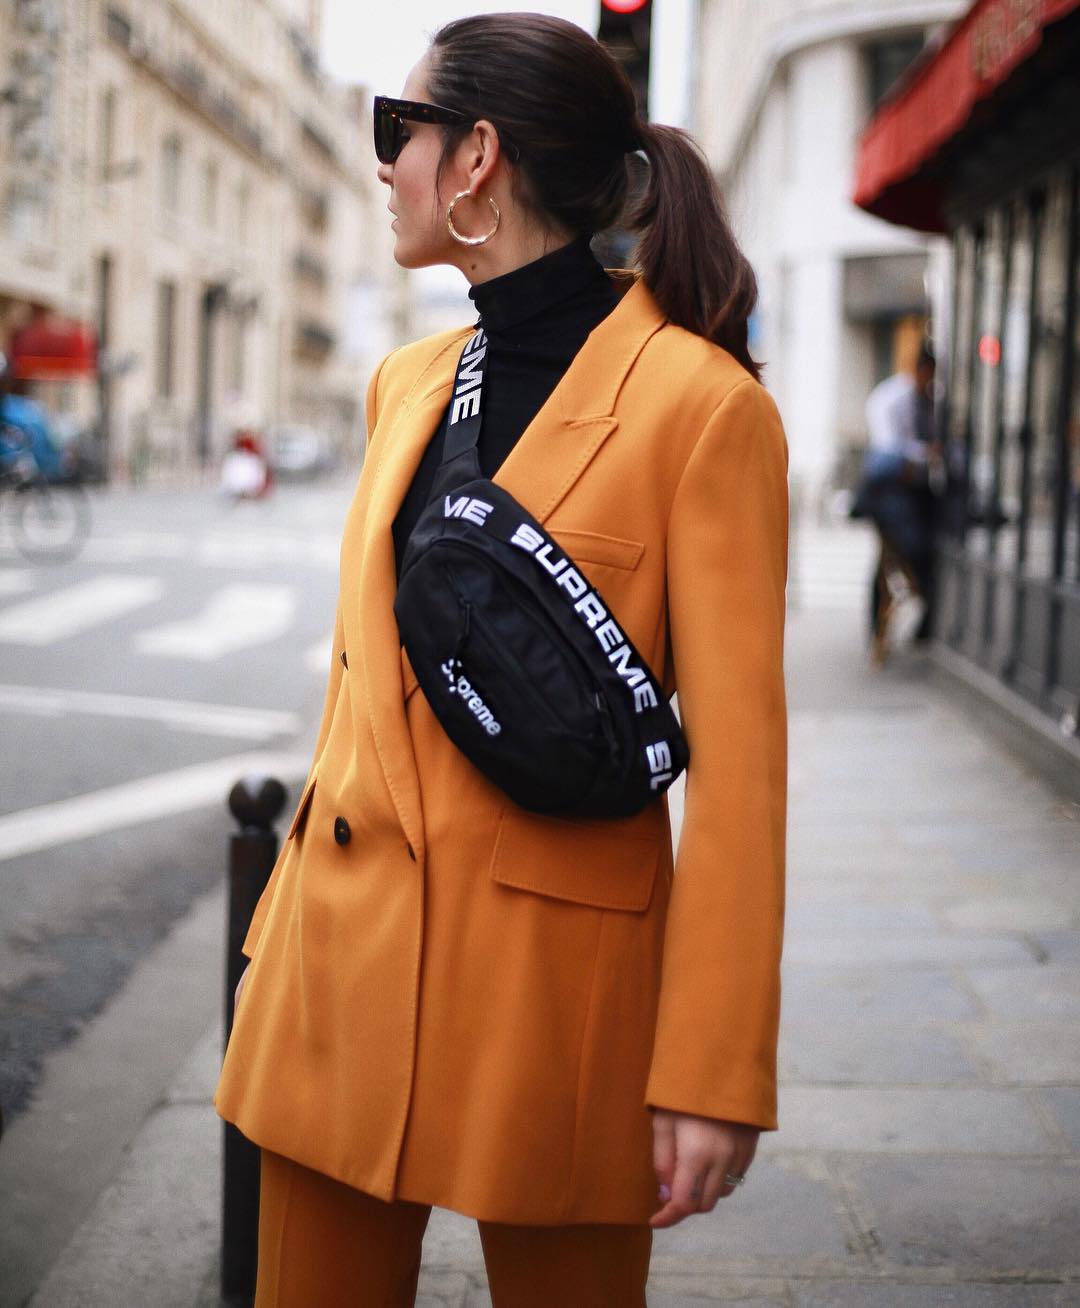 Supreme Waist Bag and a Suit in Paris for Fashion Week